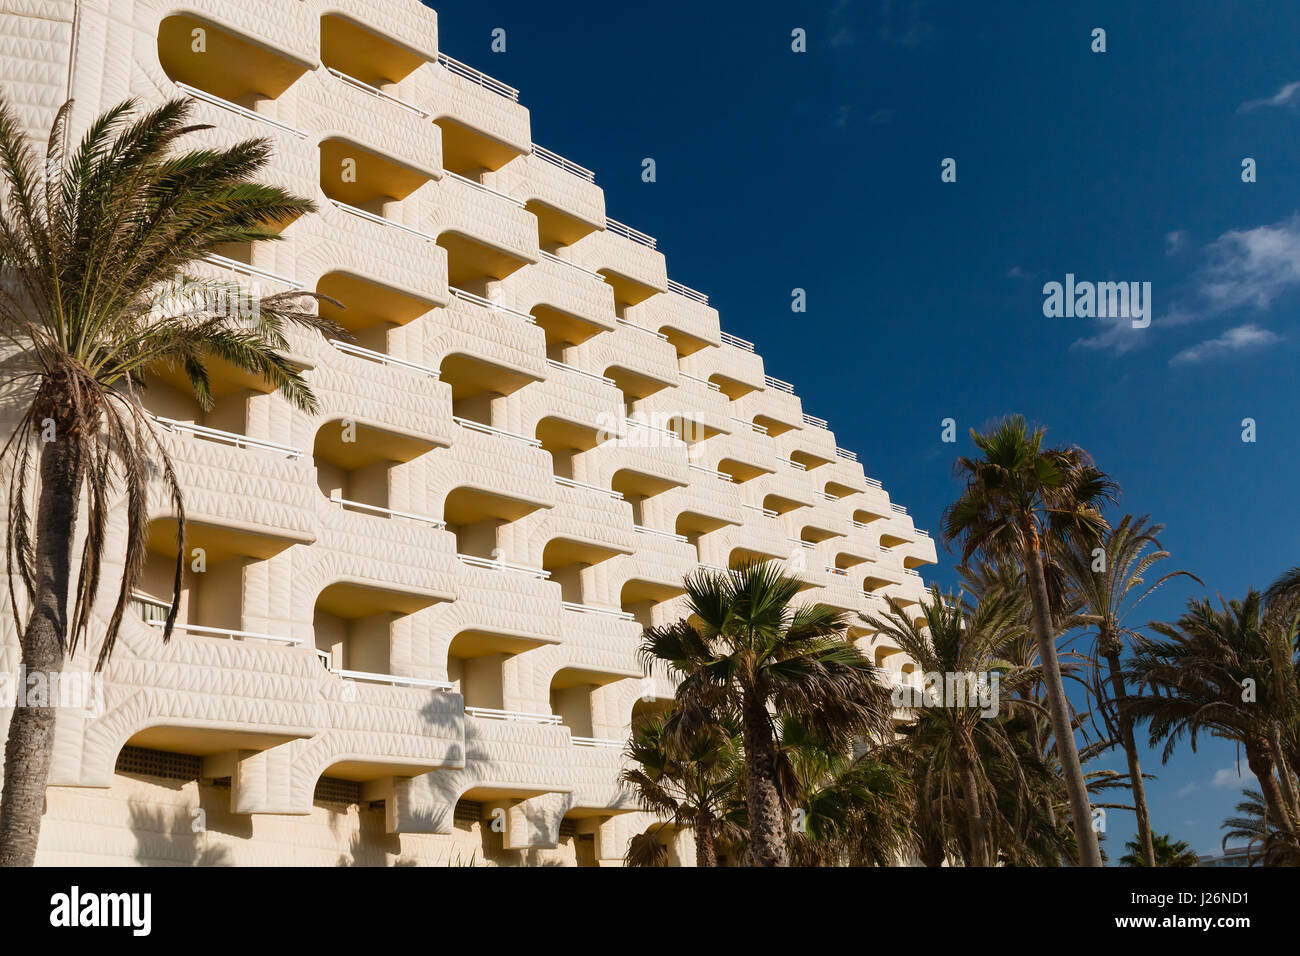 Hotel balconies and palm trees with deep blue sky in Fuerteventura, Spain Stock Photo